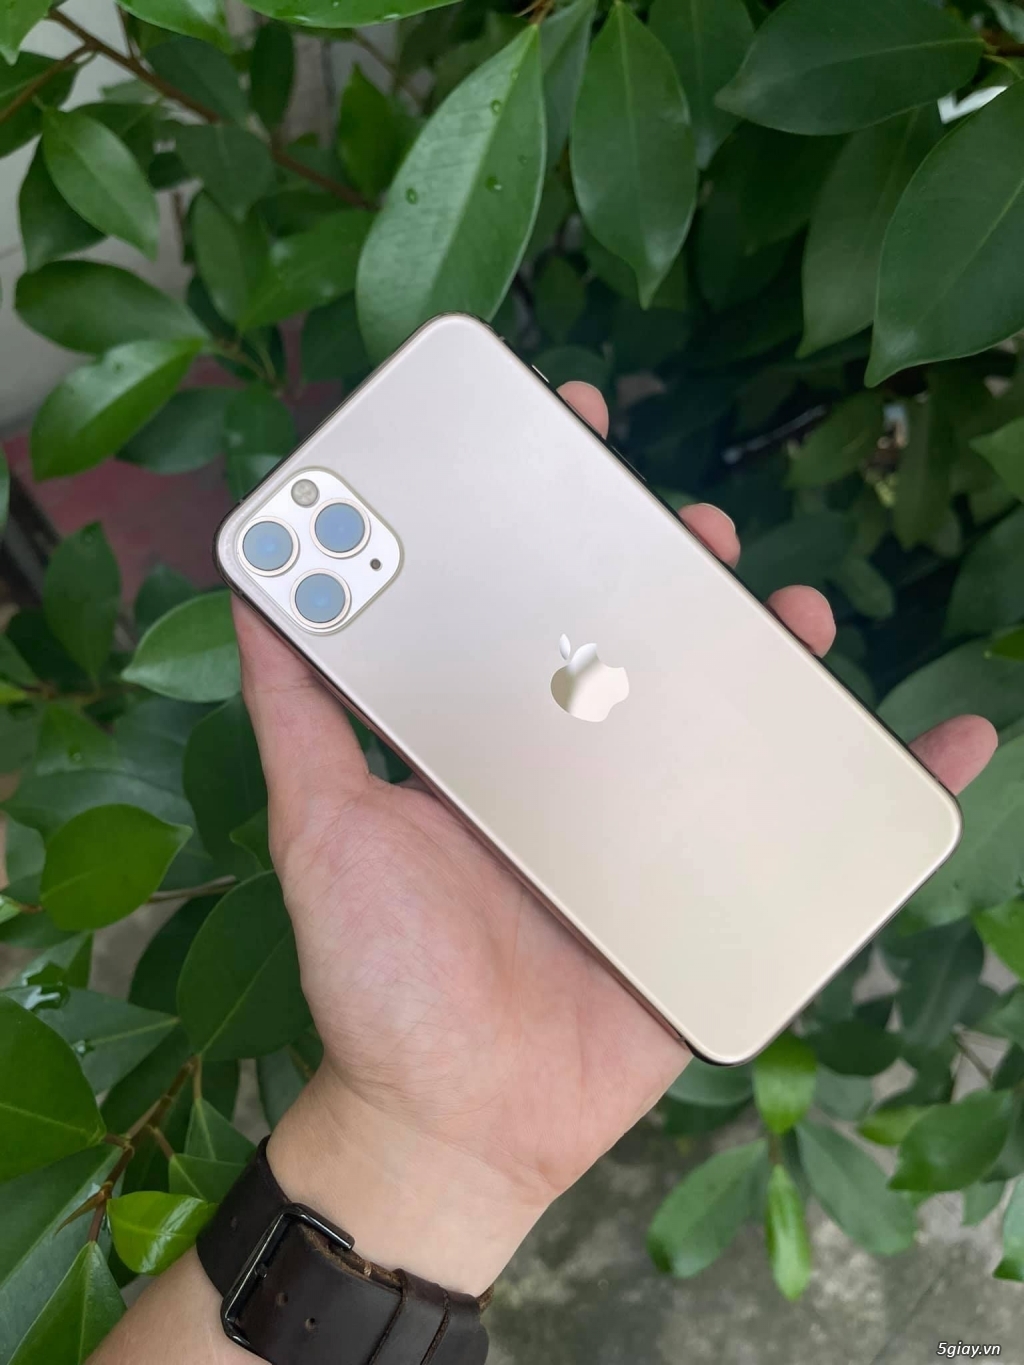 Iphone11 Promax 64G Gold | 5giay